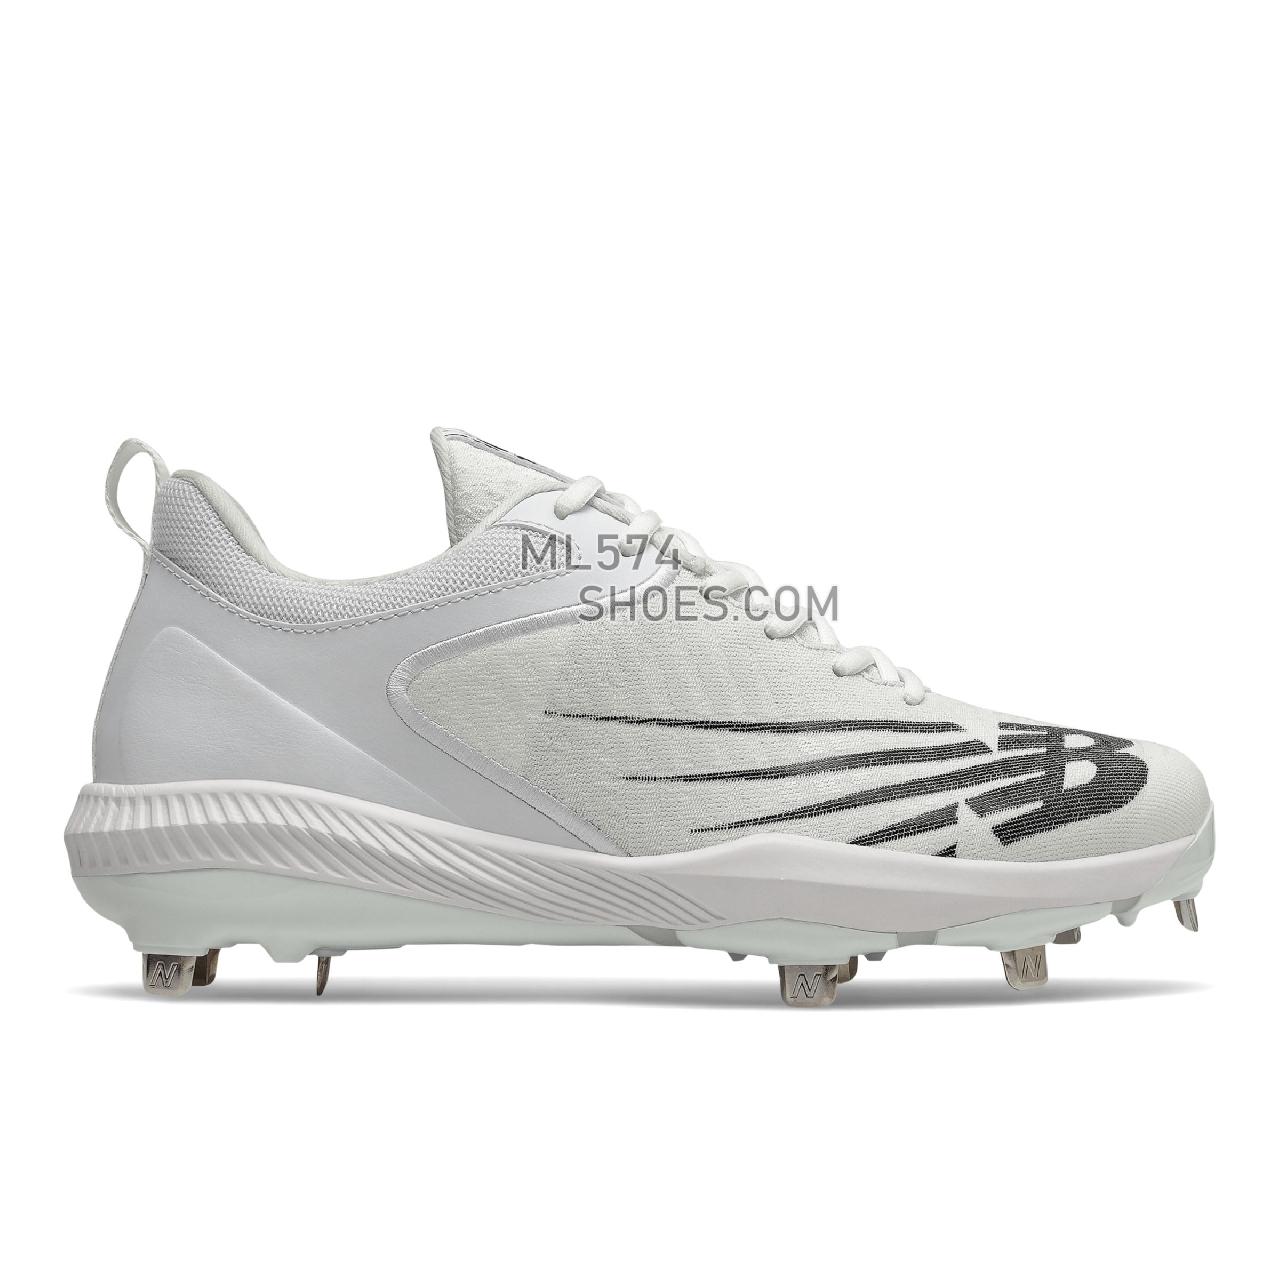 New Balance FuelCell 4040 v6 Metal - Men's Mid-Cut Baseball Cleats - White with Black - L4040TW6